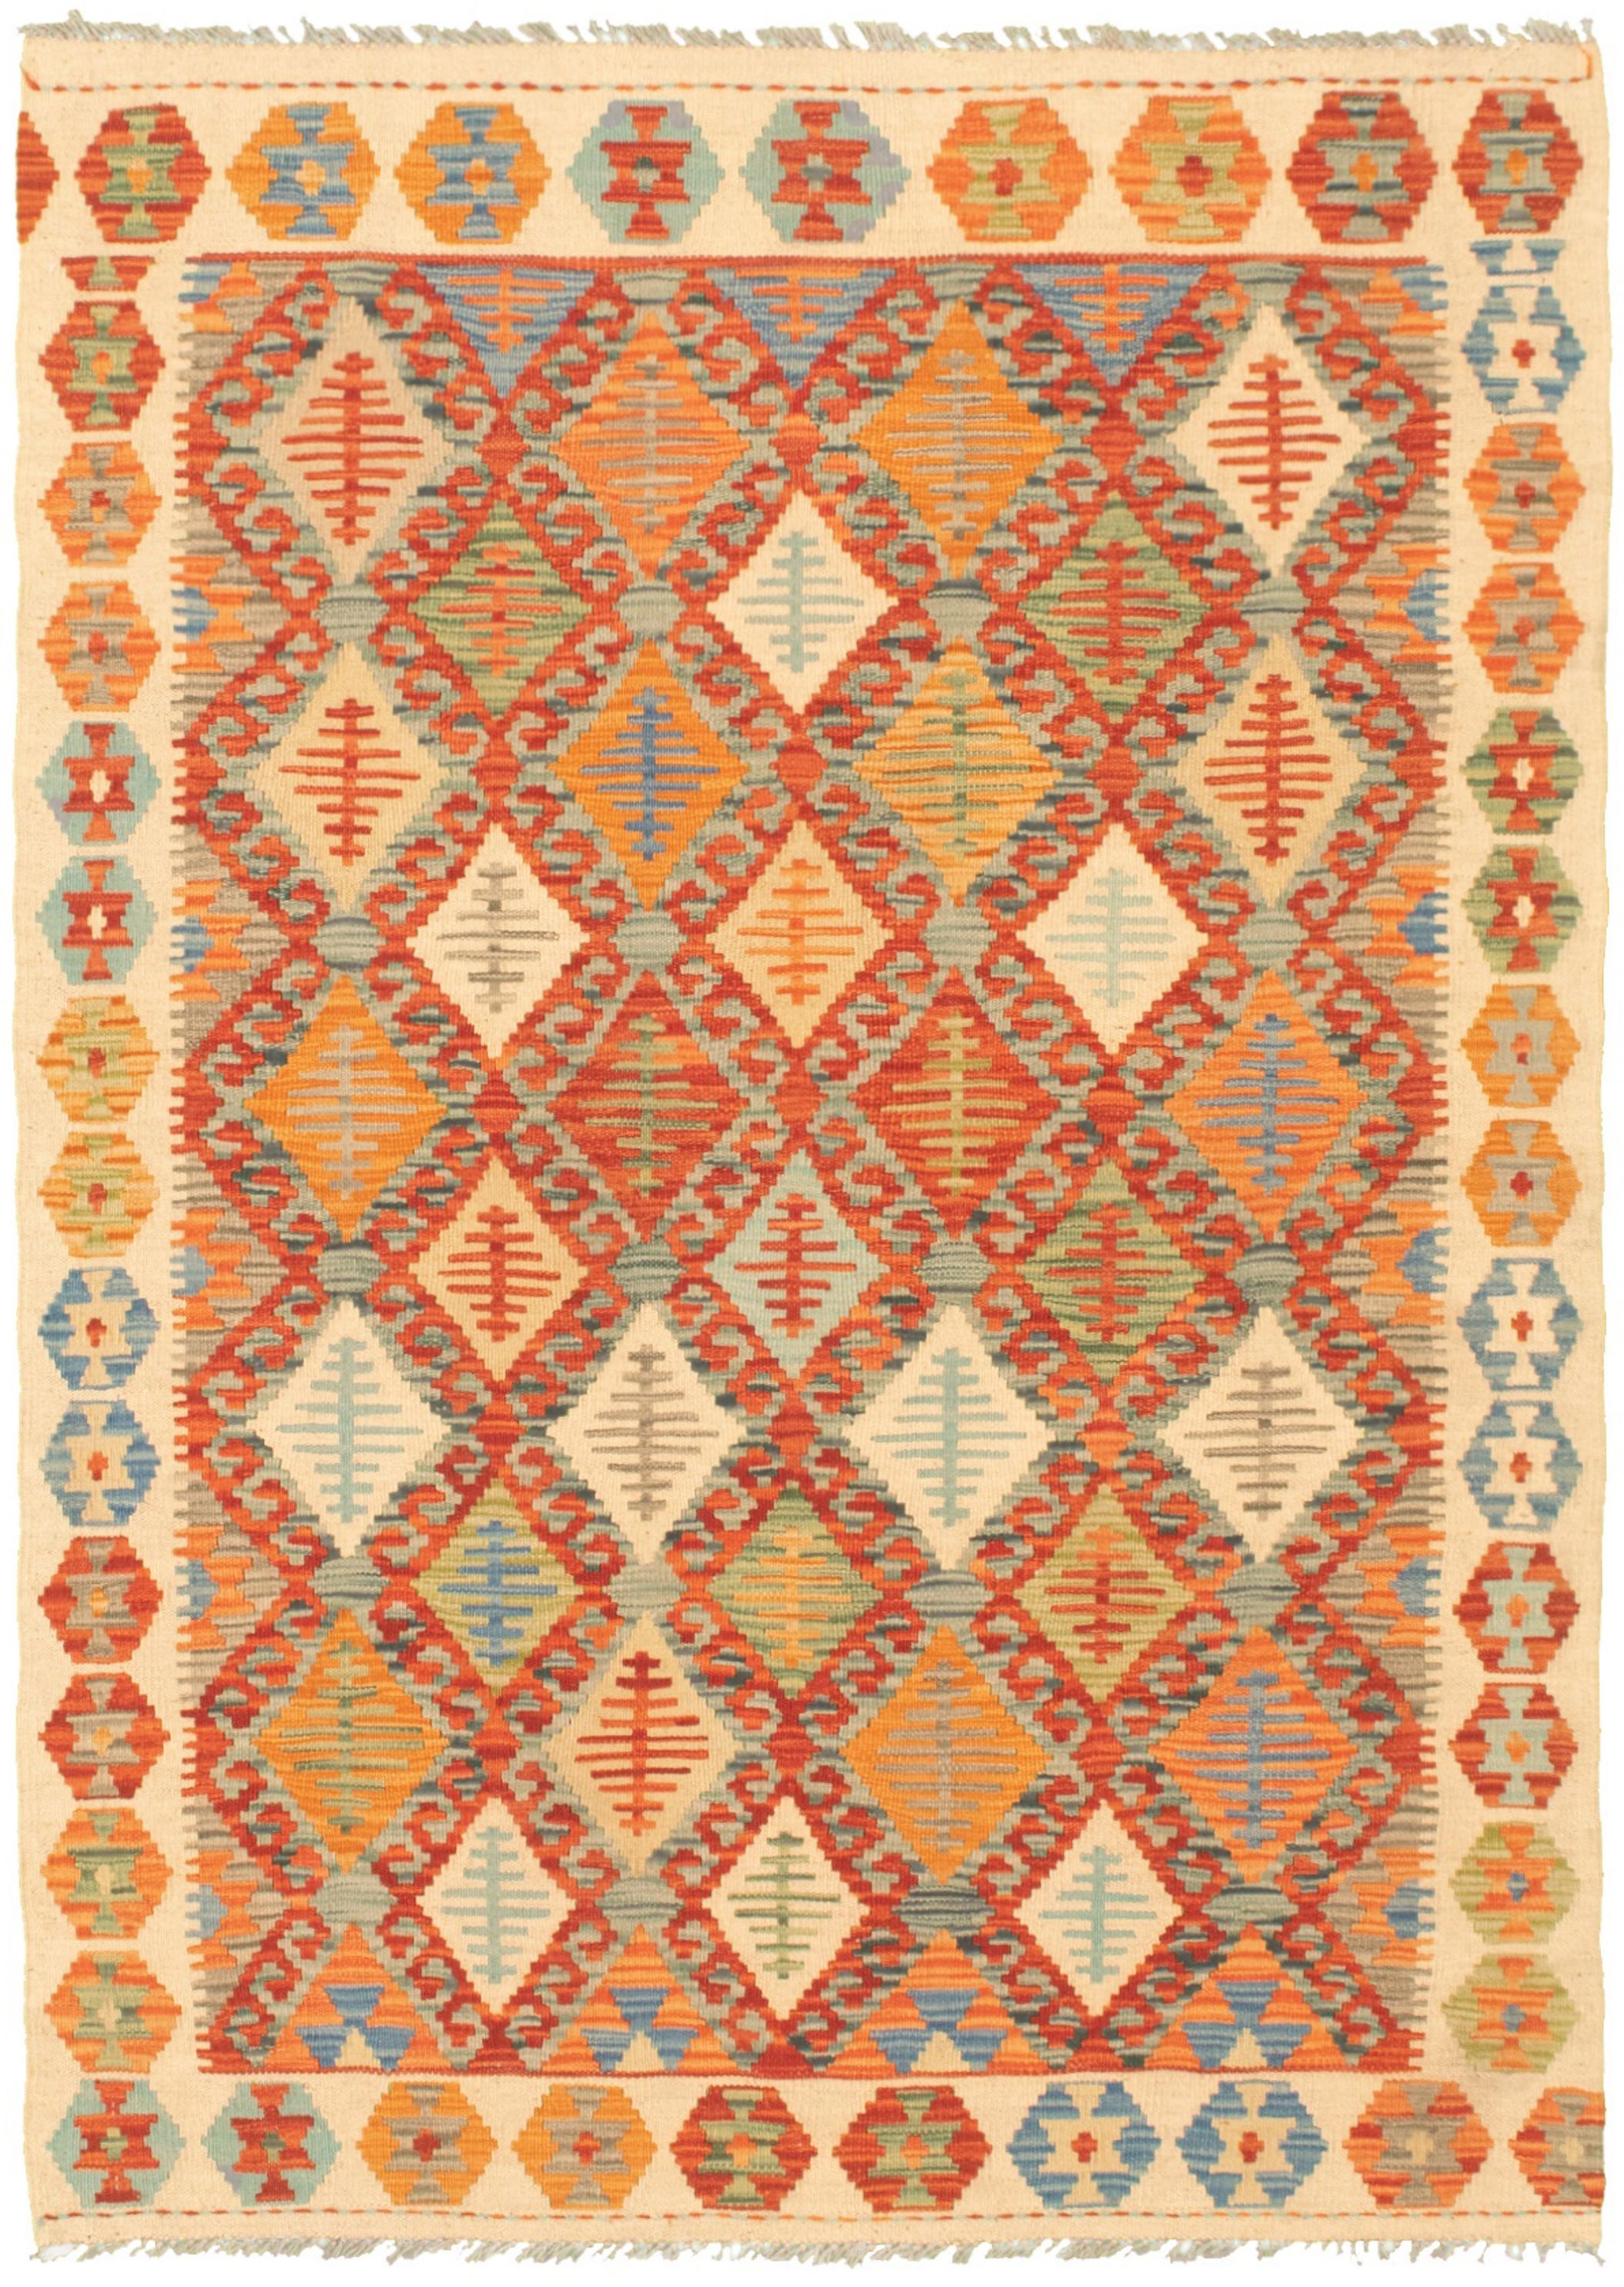 Hand woven Bold and Colorful  Dark Copper Wool Kilim 4'5" x 6'2"  Size: 4'5" x 6'2"  